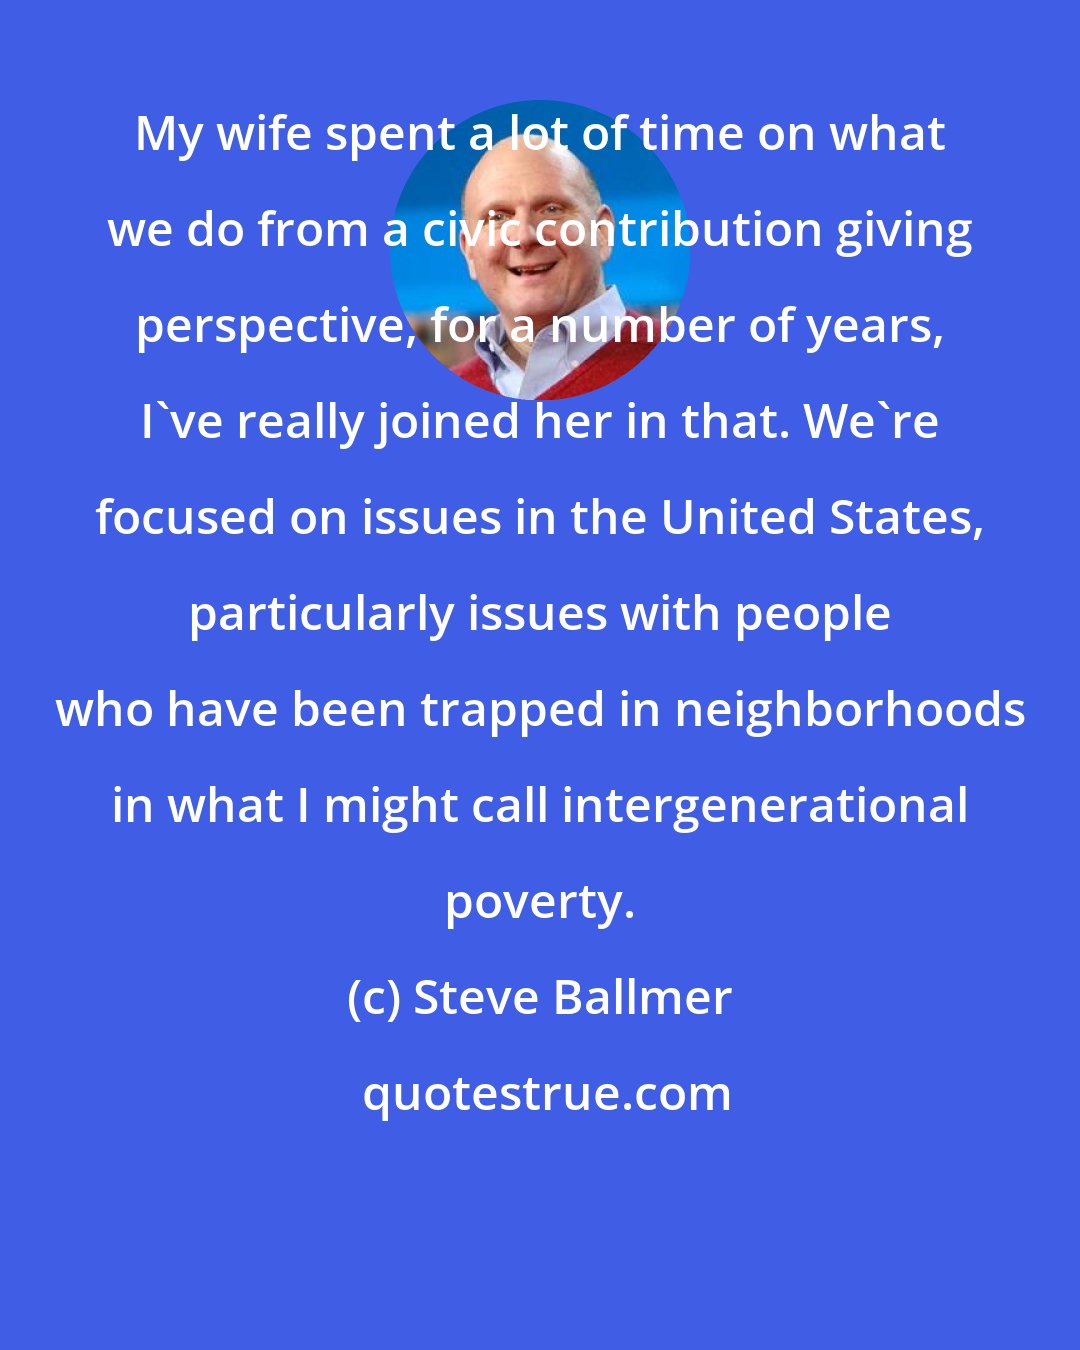 Steve Ballmer: My wife spent a lot of time on what we do from a civic contribution giving perspective, for a number of years, I've really joined her in that. We're focused on issues in the United States, particularly issues with people who have been trapped in neighborhoods in what I might call intergenerational poverty.